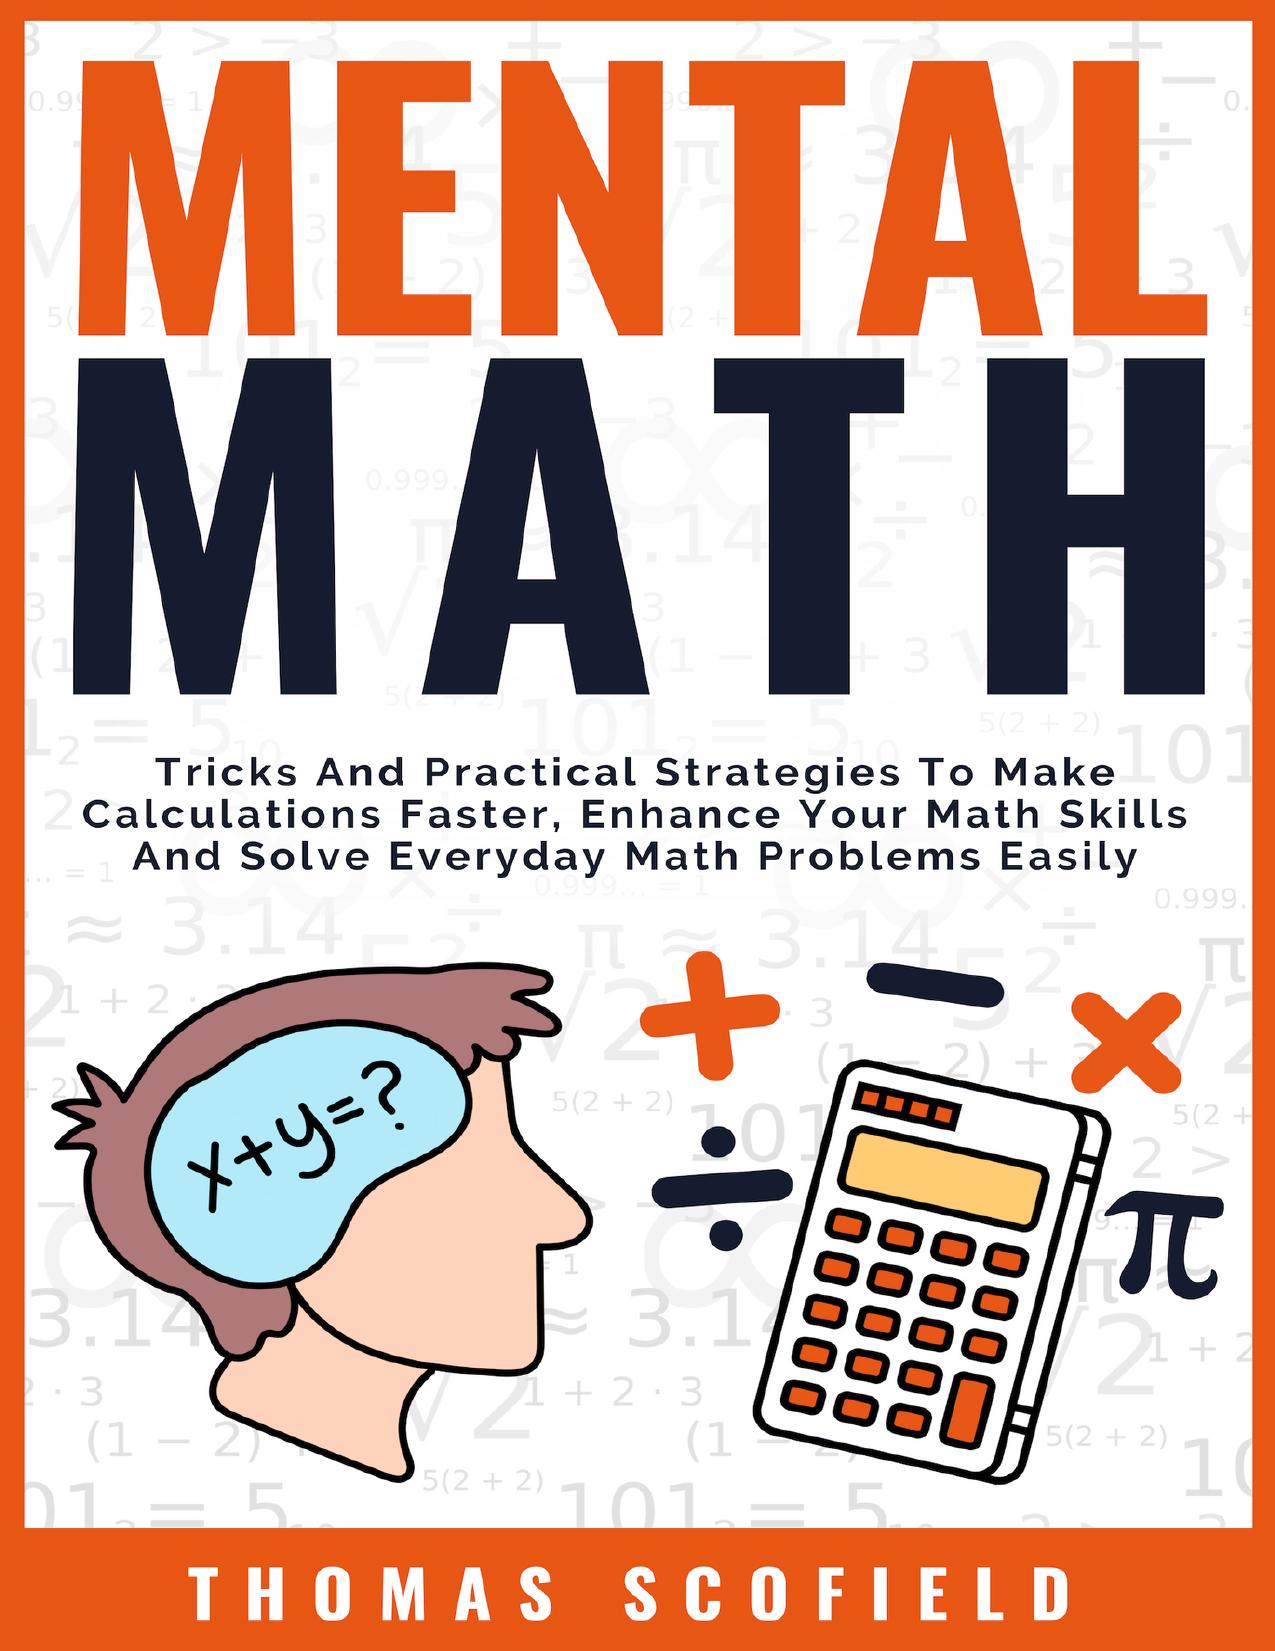 Mental Math: Tricks And Practical Strategies To Make Calculations Faster, Enhance Your Math Skills And Solve Everyday Math Problems Easily by Scofield Thomas